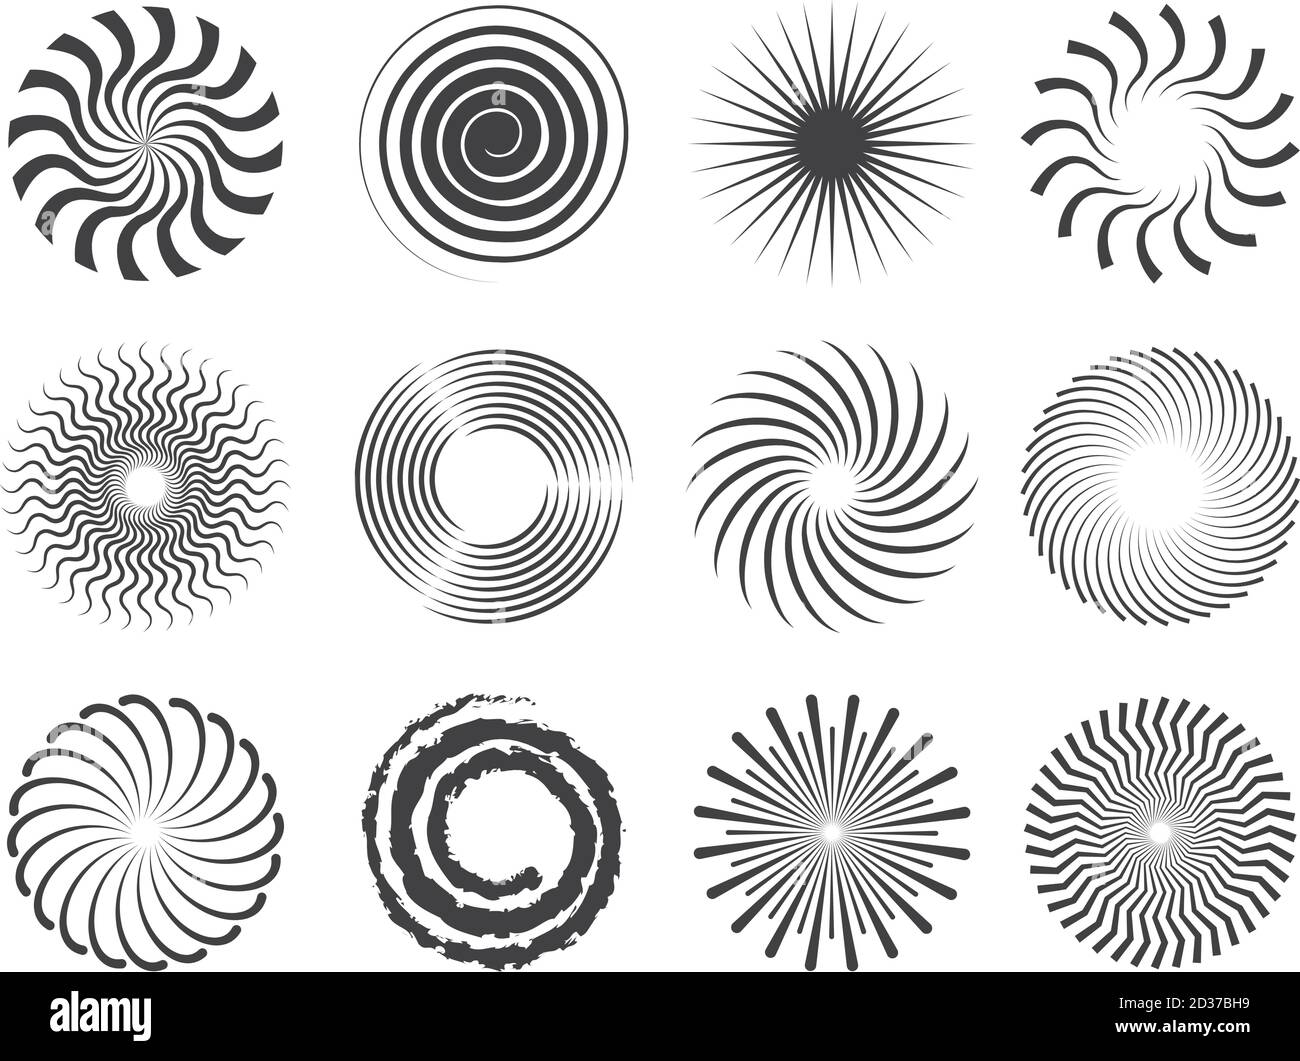 Spiral design. Circles swirls and stylized whirlpool abstract vector shapes isolated Stock Vector